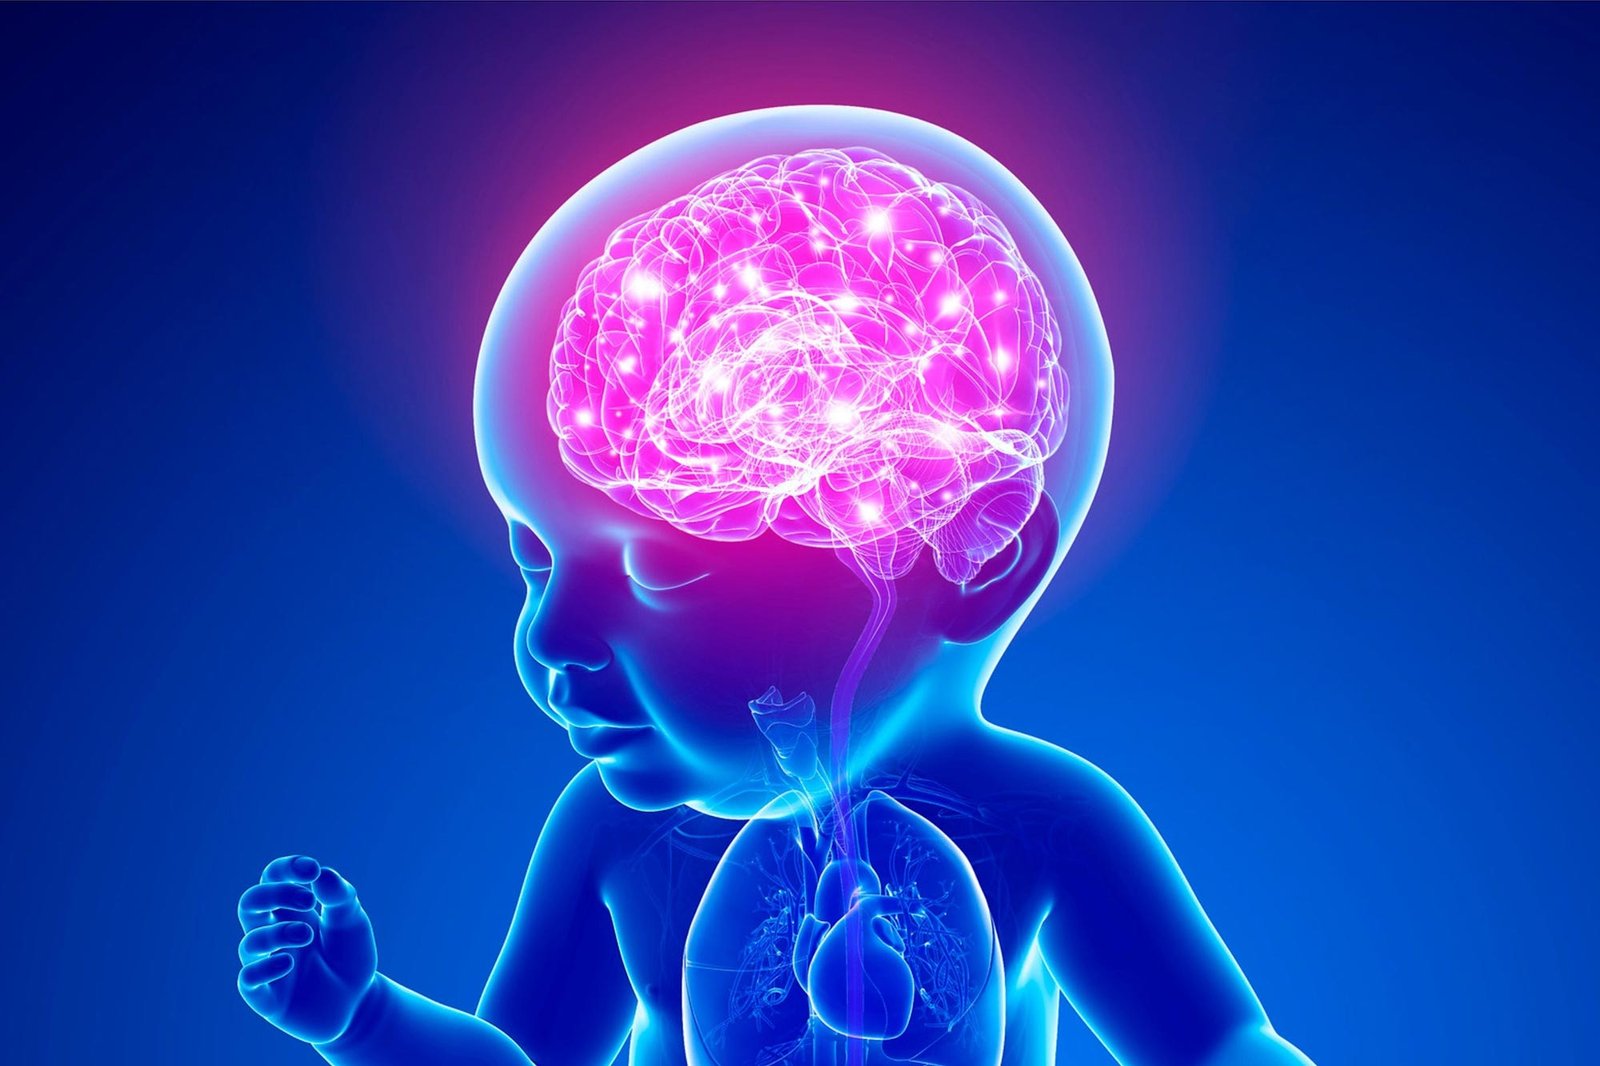 Classical Explanation Debunked – Scientists Discover Striking Similarities Between Baby Brains and AI